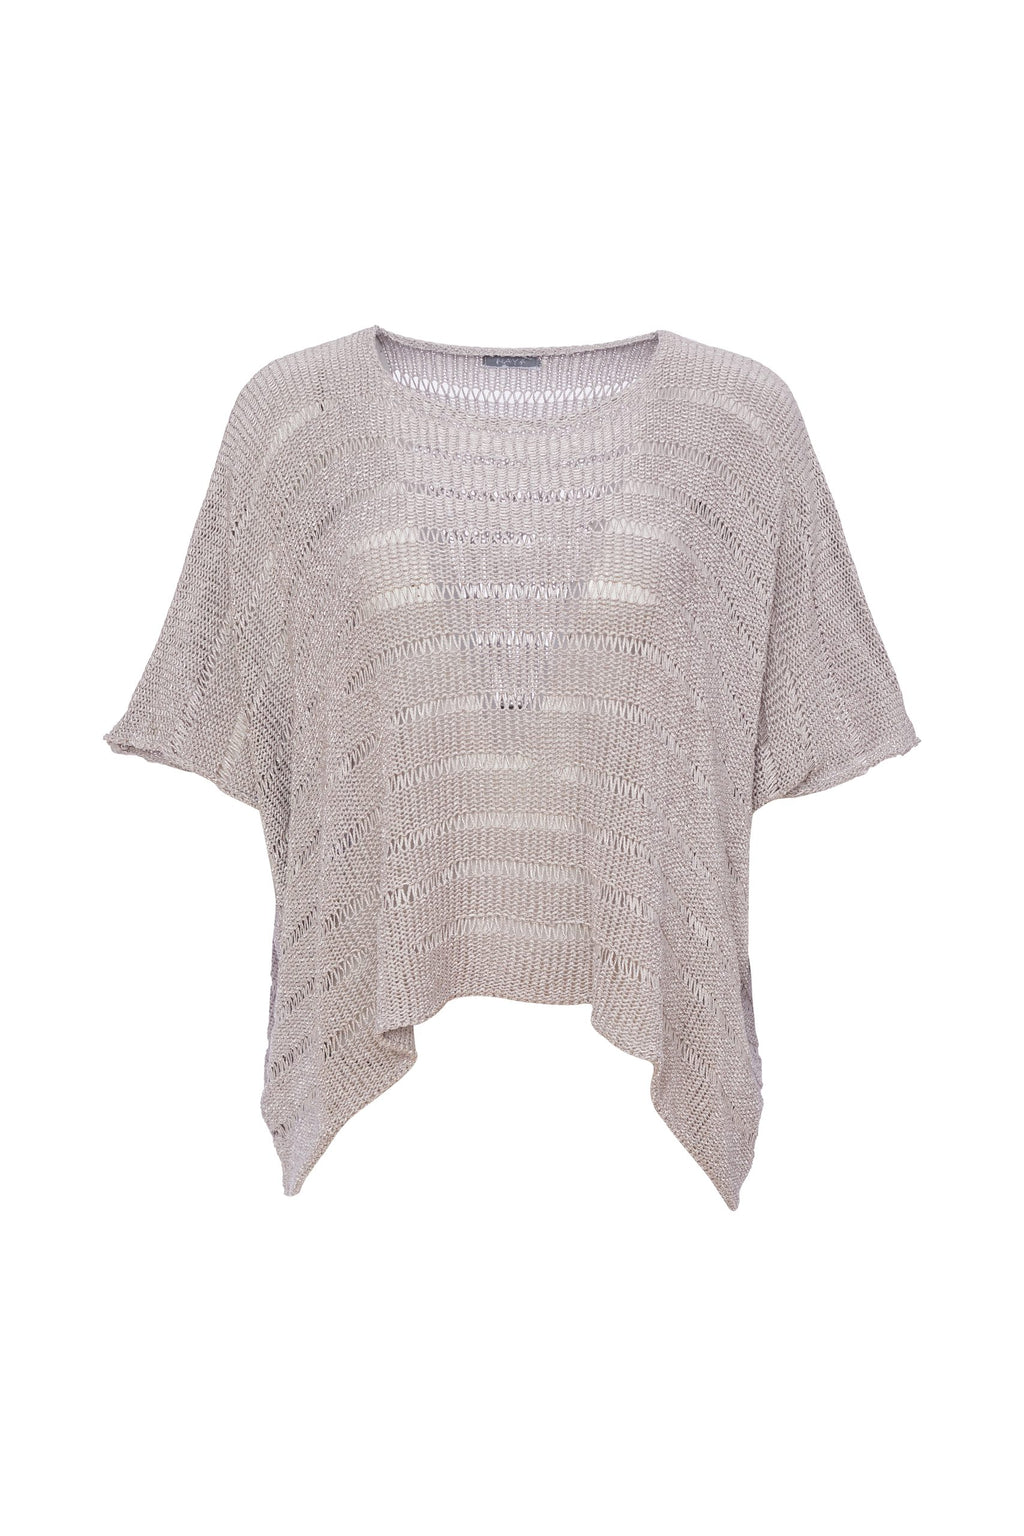 Woven overlayer knit (stone)